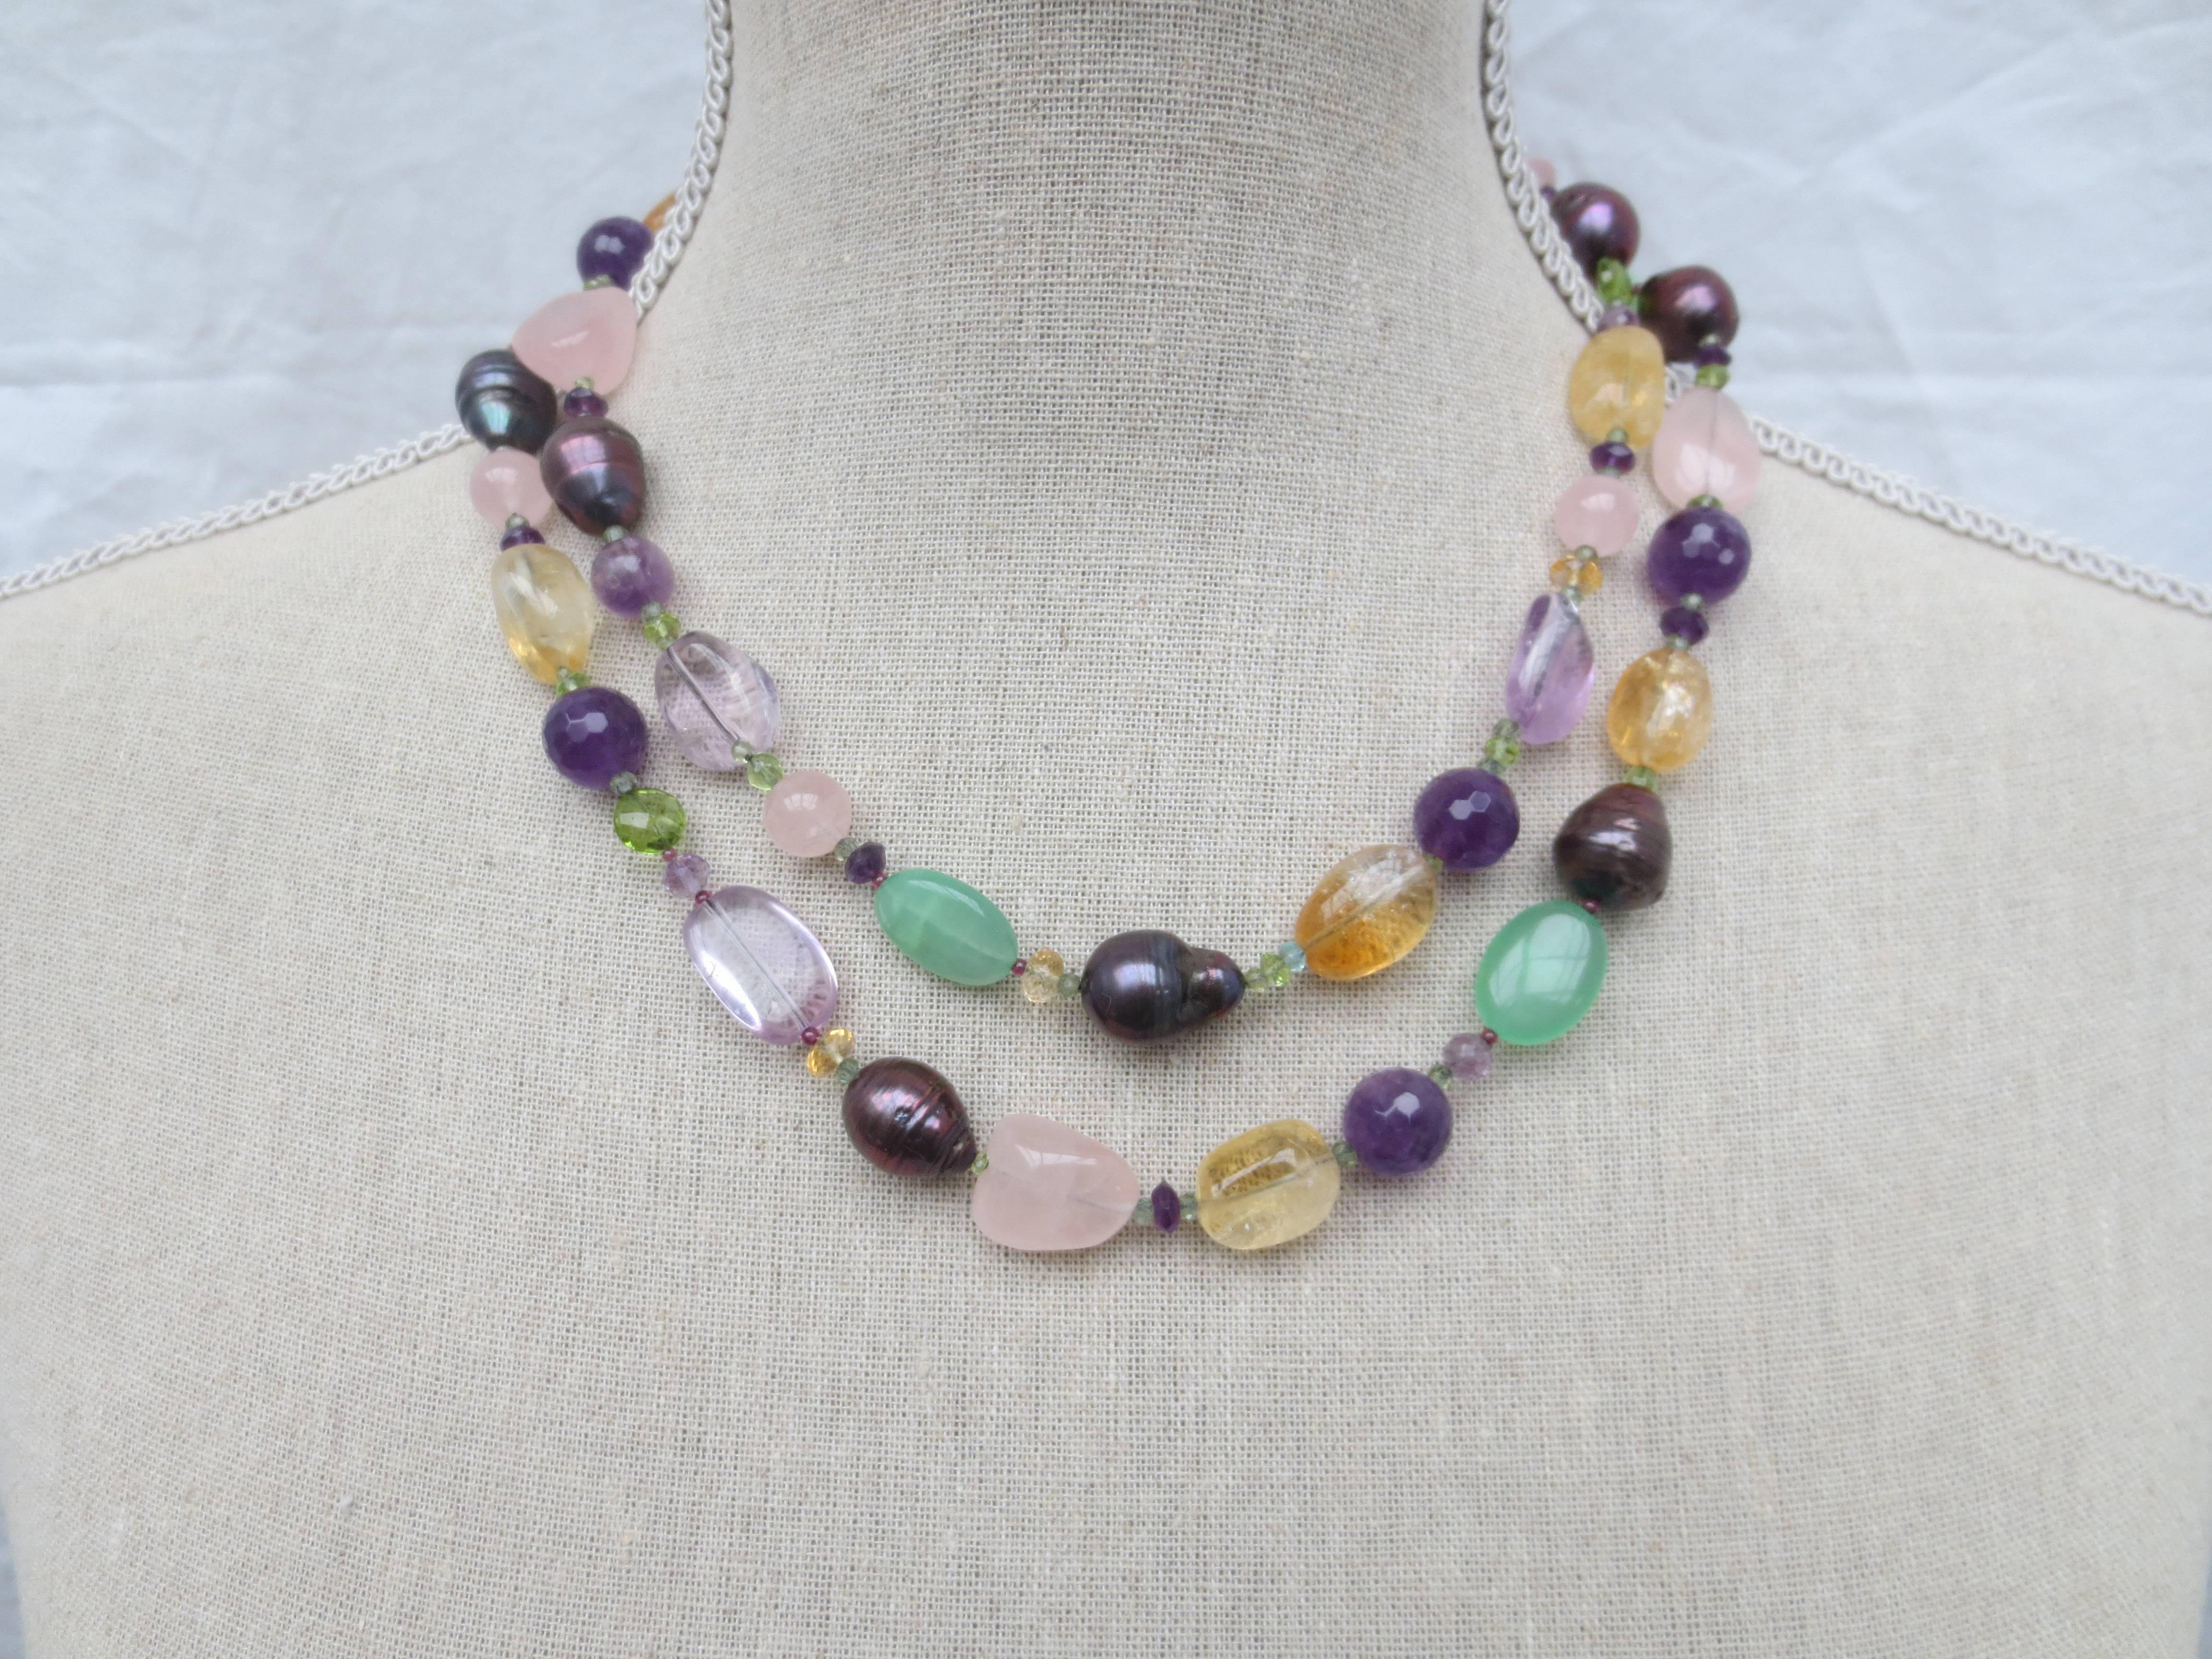 Multi color semi-precious stones citrine, pink quartz, black pearls, amethyst, peridot, florite, green tourmaline, and garnet are combined to create a gorgeous shimmering piece. 

Without tassel, necklace measures 41 inches long. The tassel is